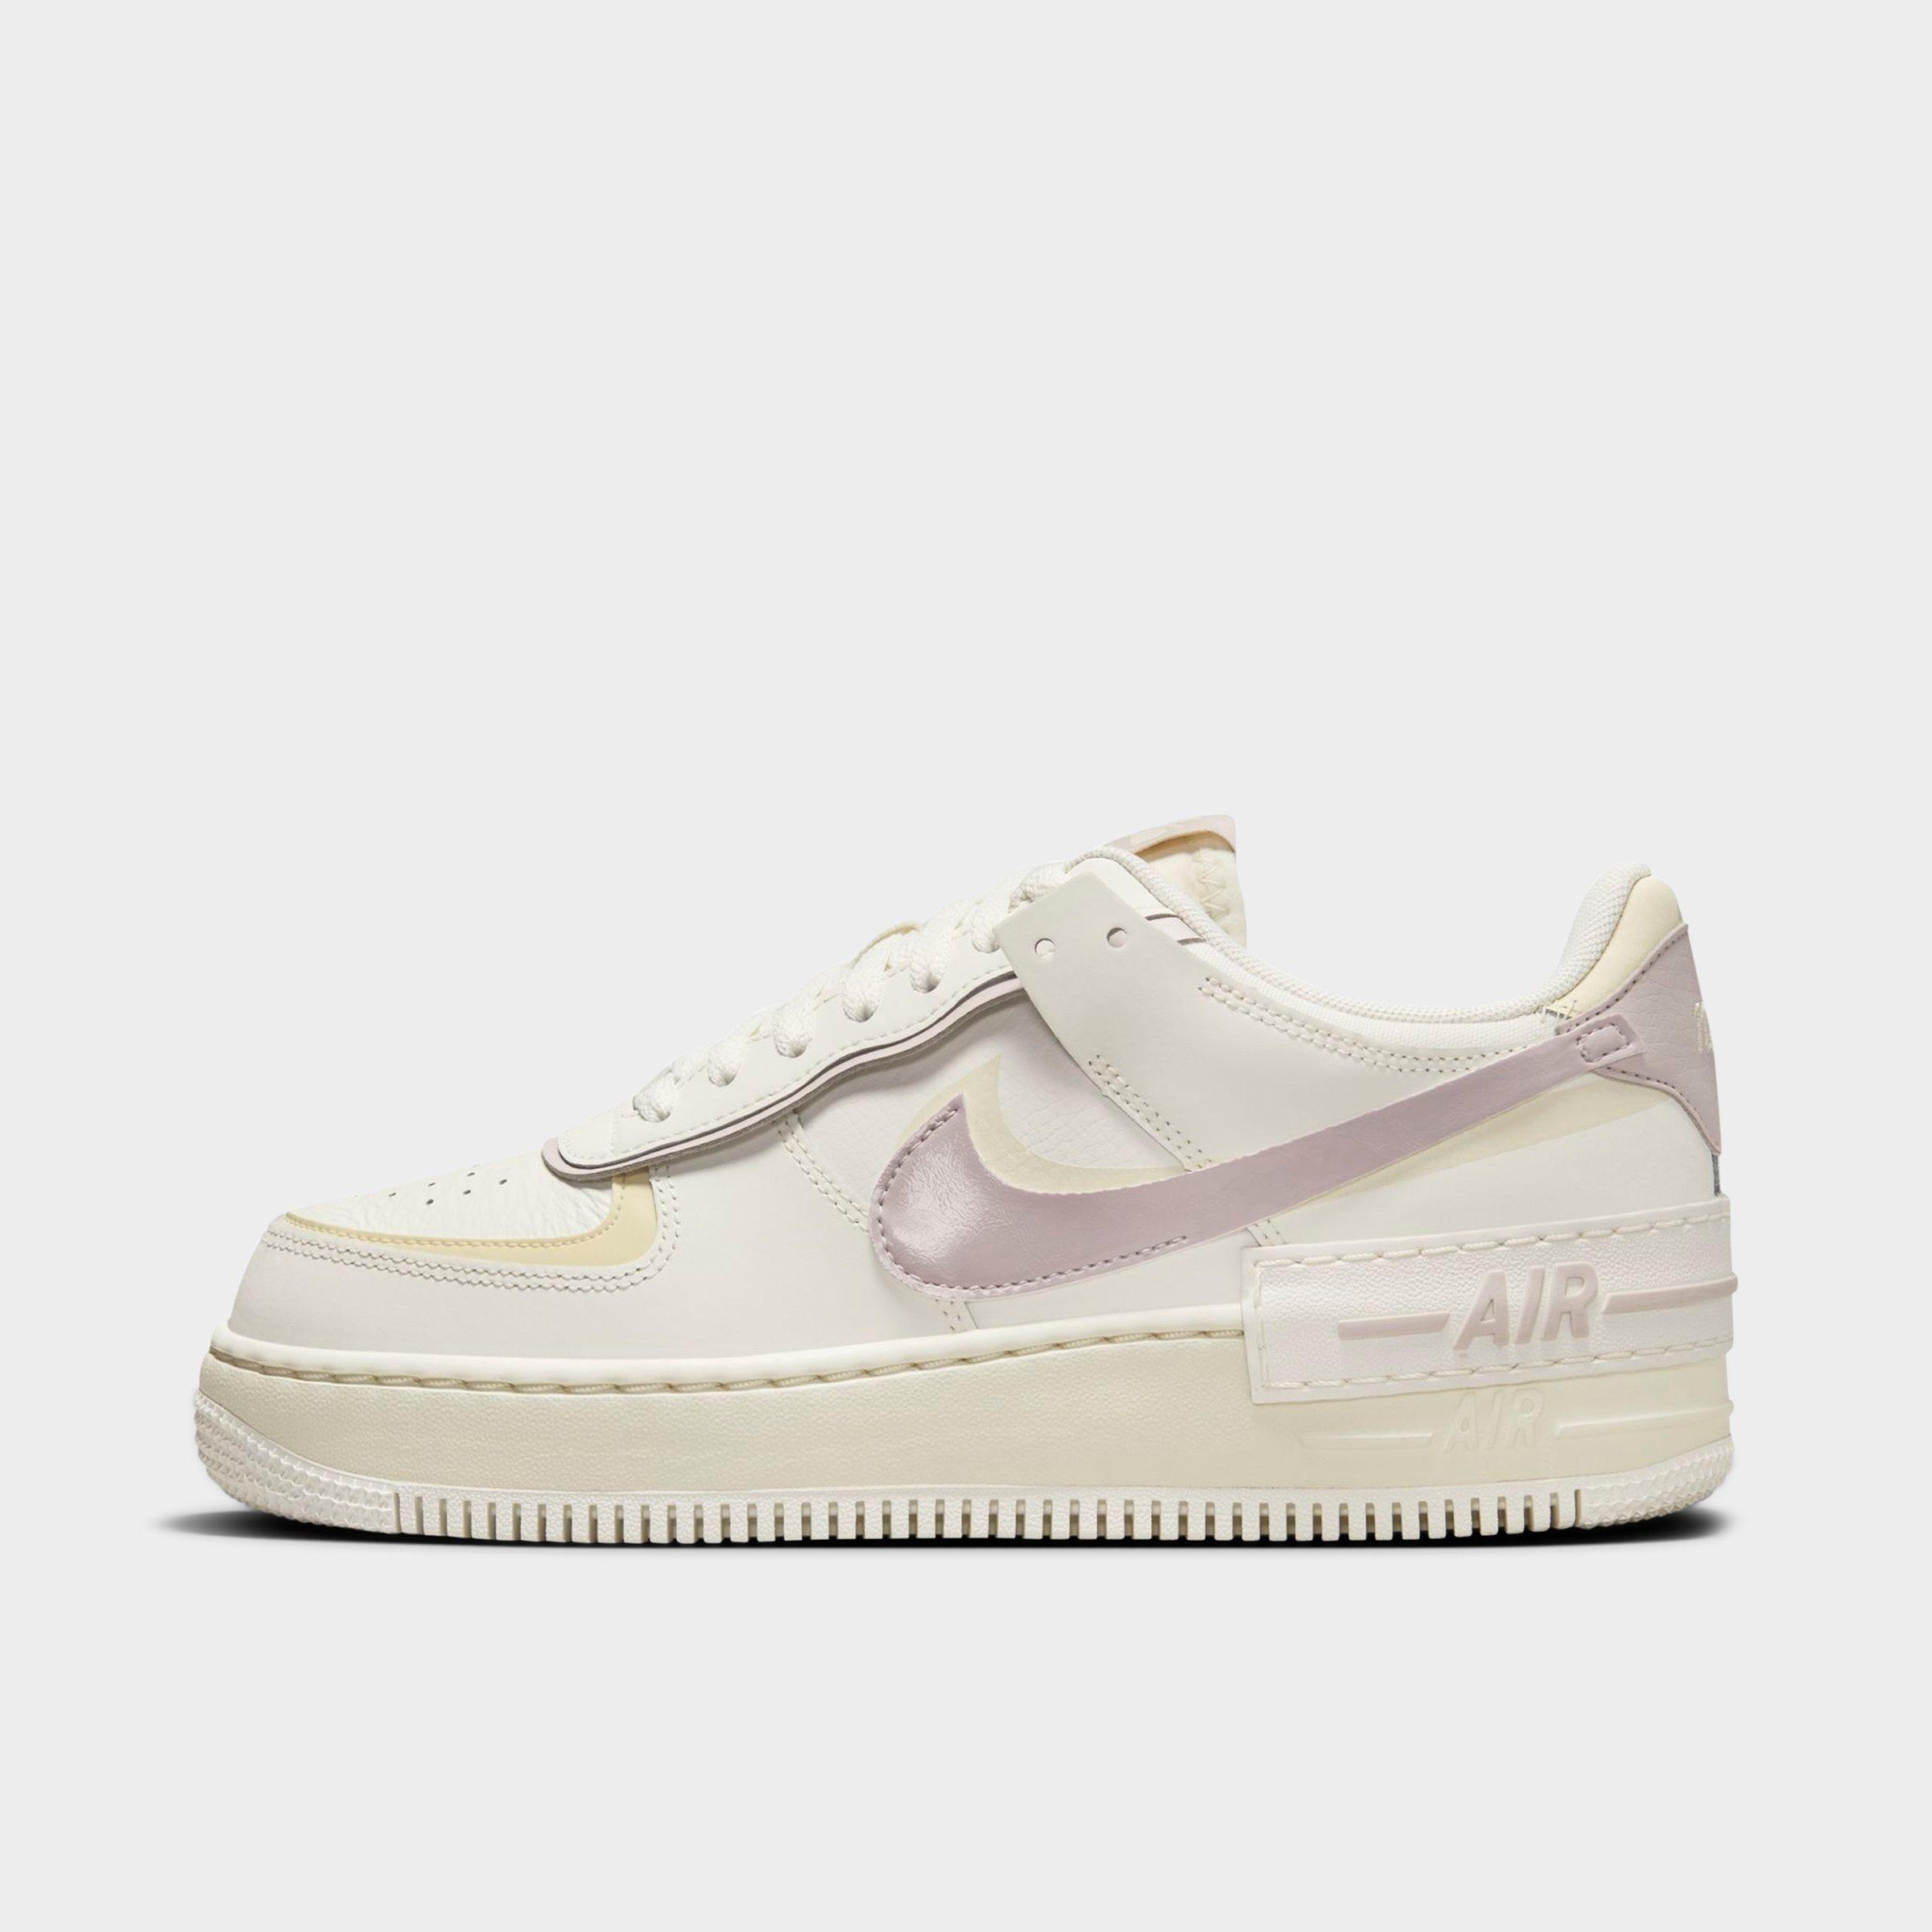 Air Force 1 Shadow Sail Pale Ivory (Women's)